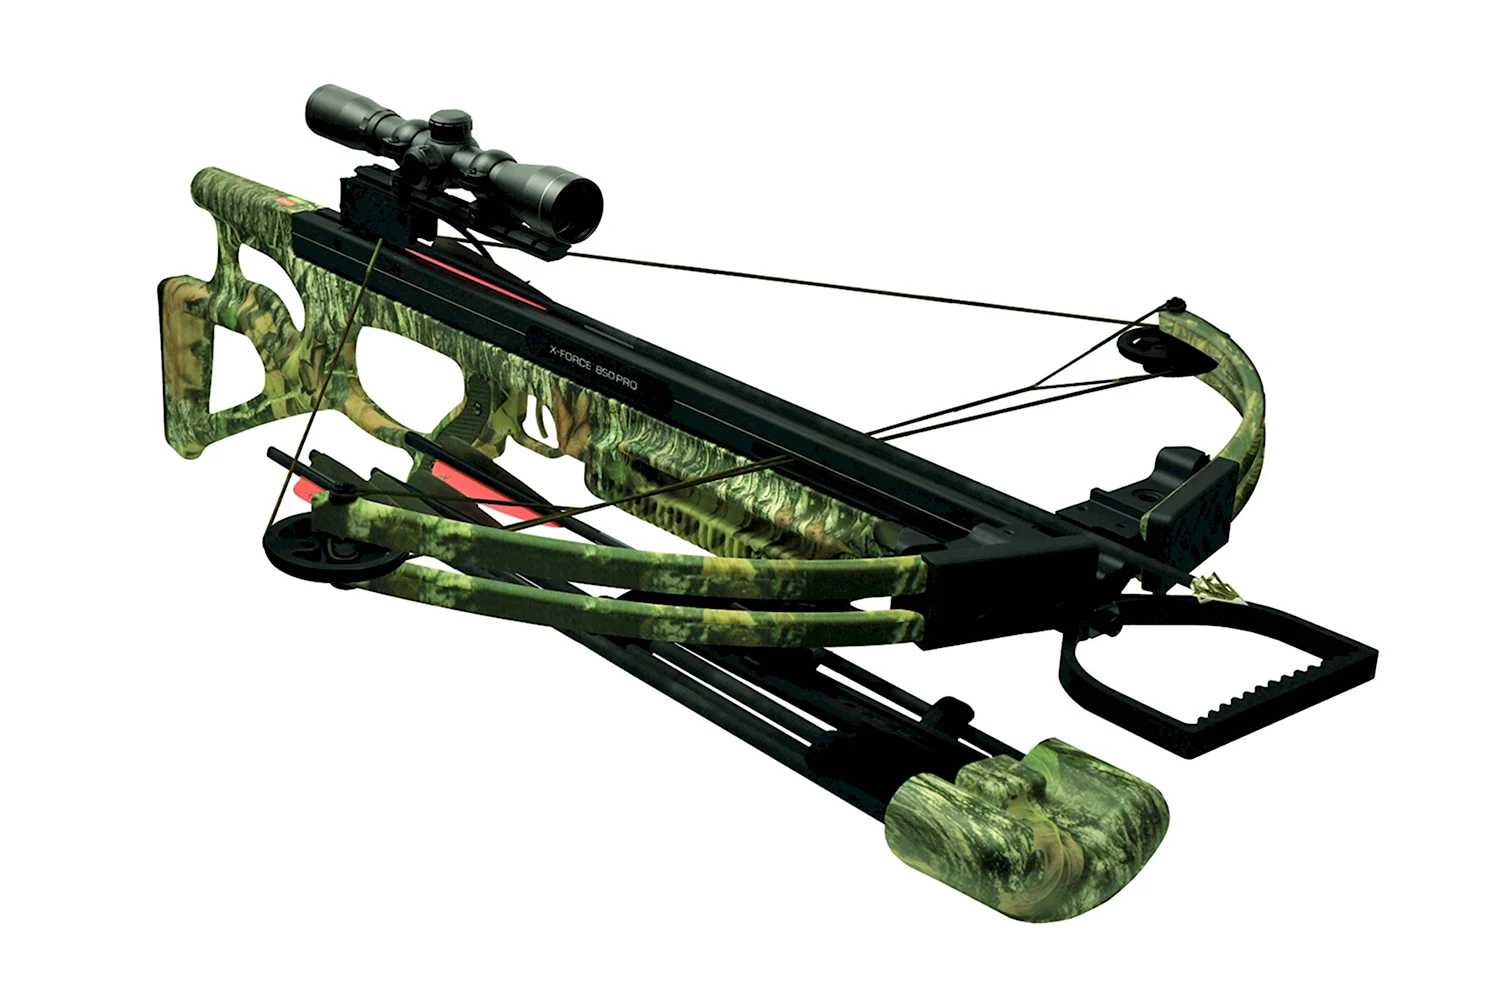 Carbon Express x Force 850pro Crossbow Kit